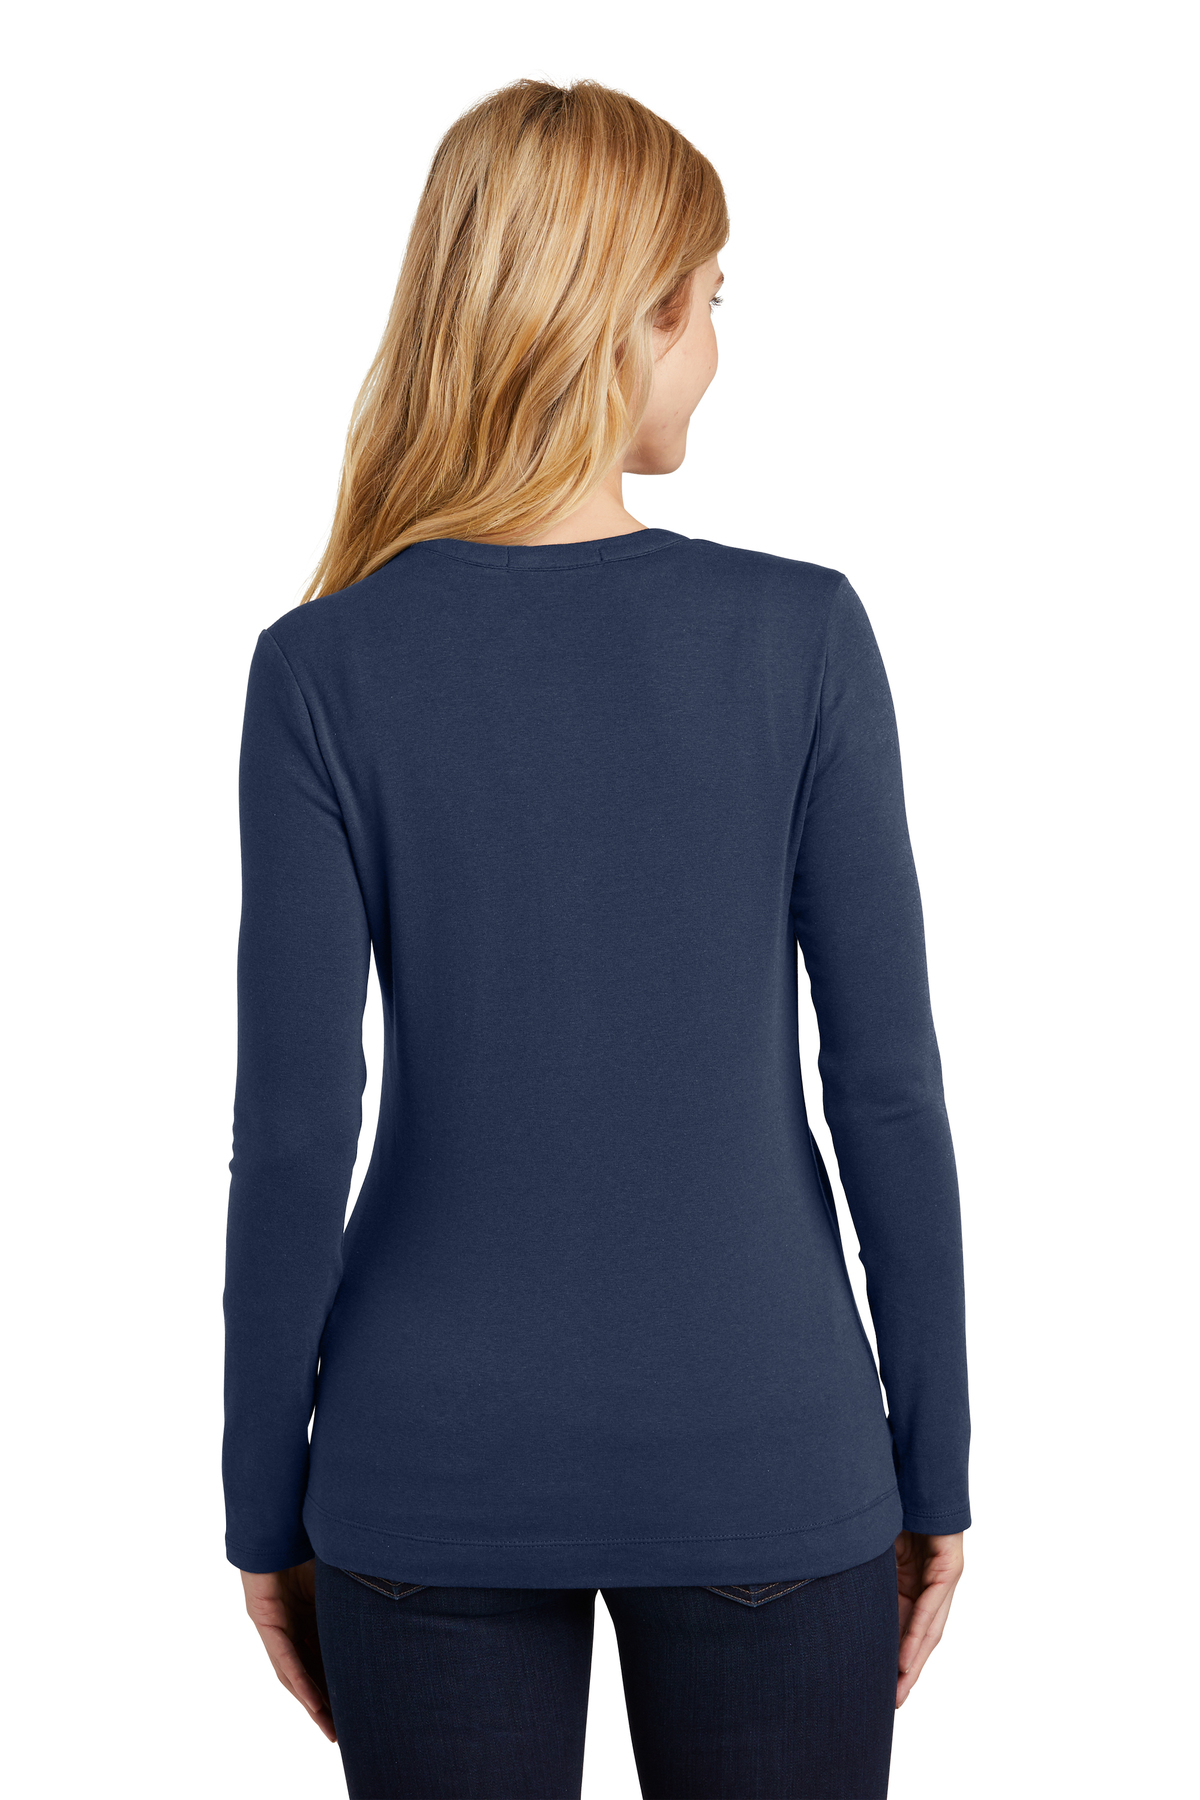 Authority Port Ladies Stretch Product | Authority | Cardigan Concept Port Button-Front